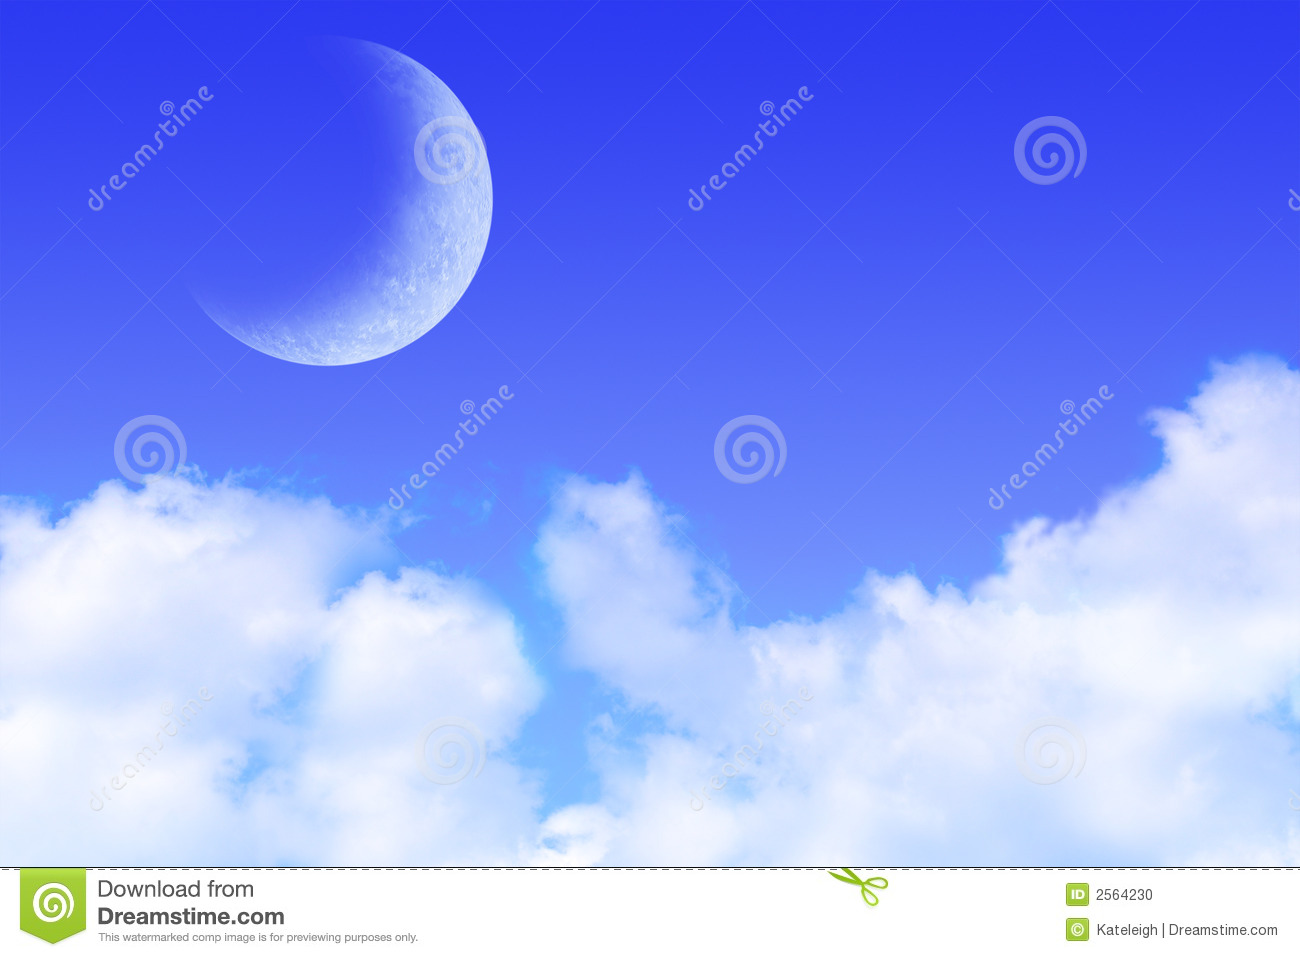 Blue Skies with Clouds and Moon